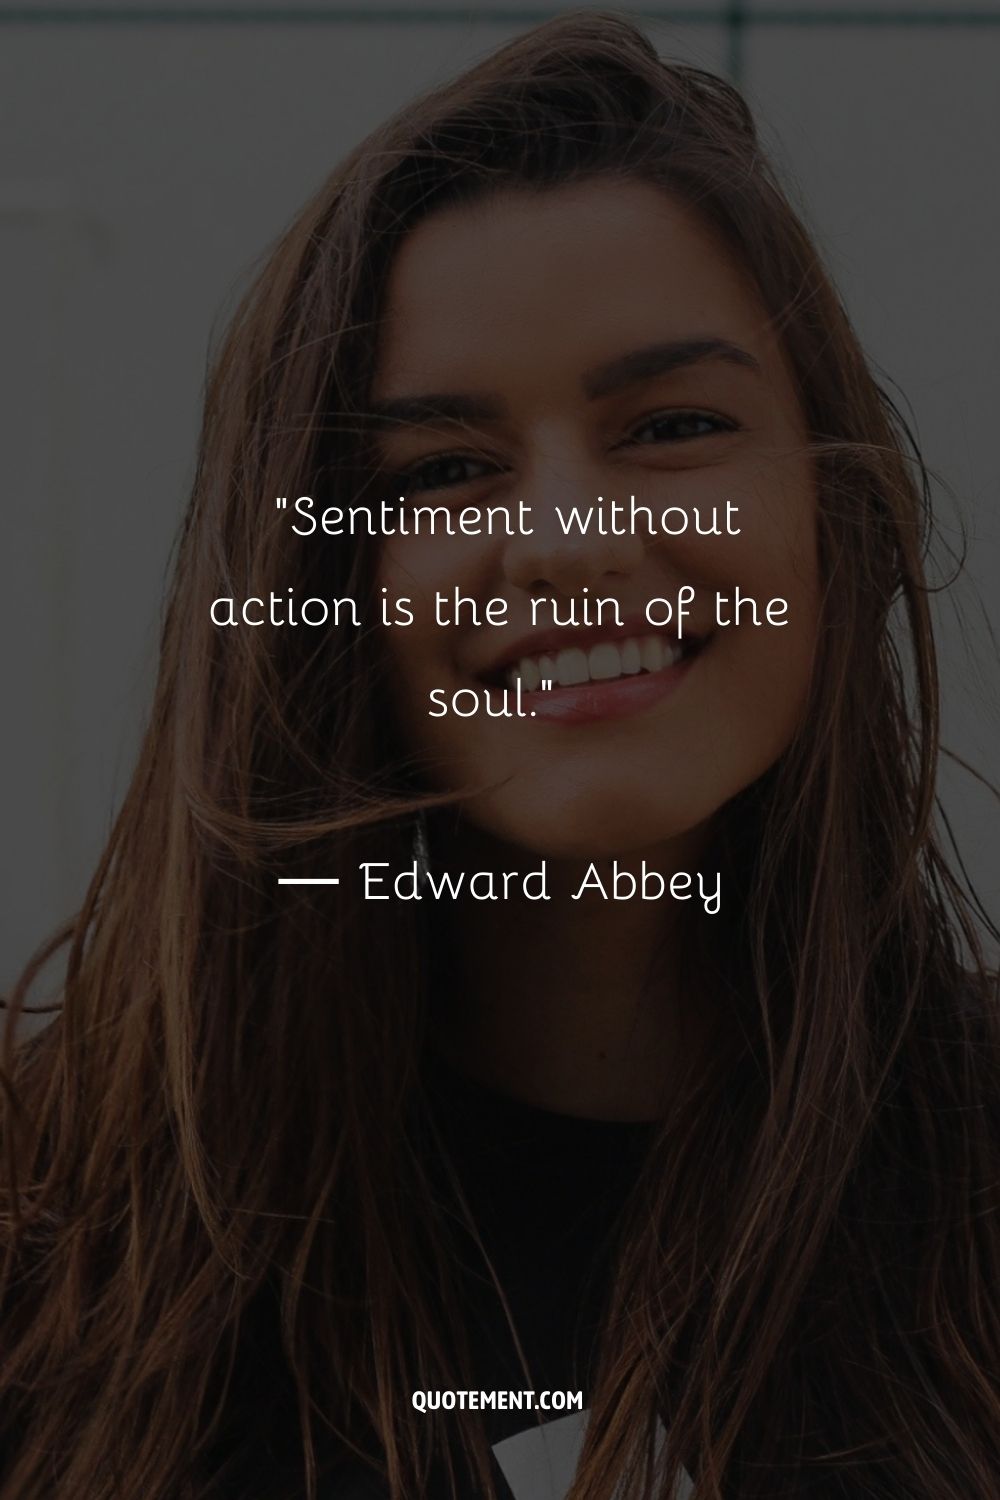 Sentiment without action is the ruin of the soul.